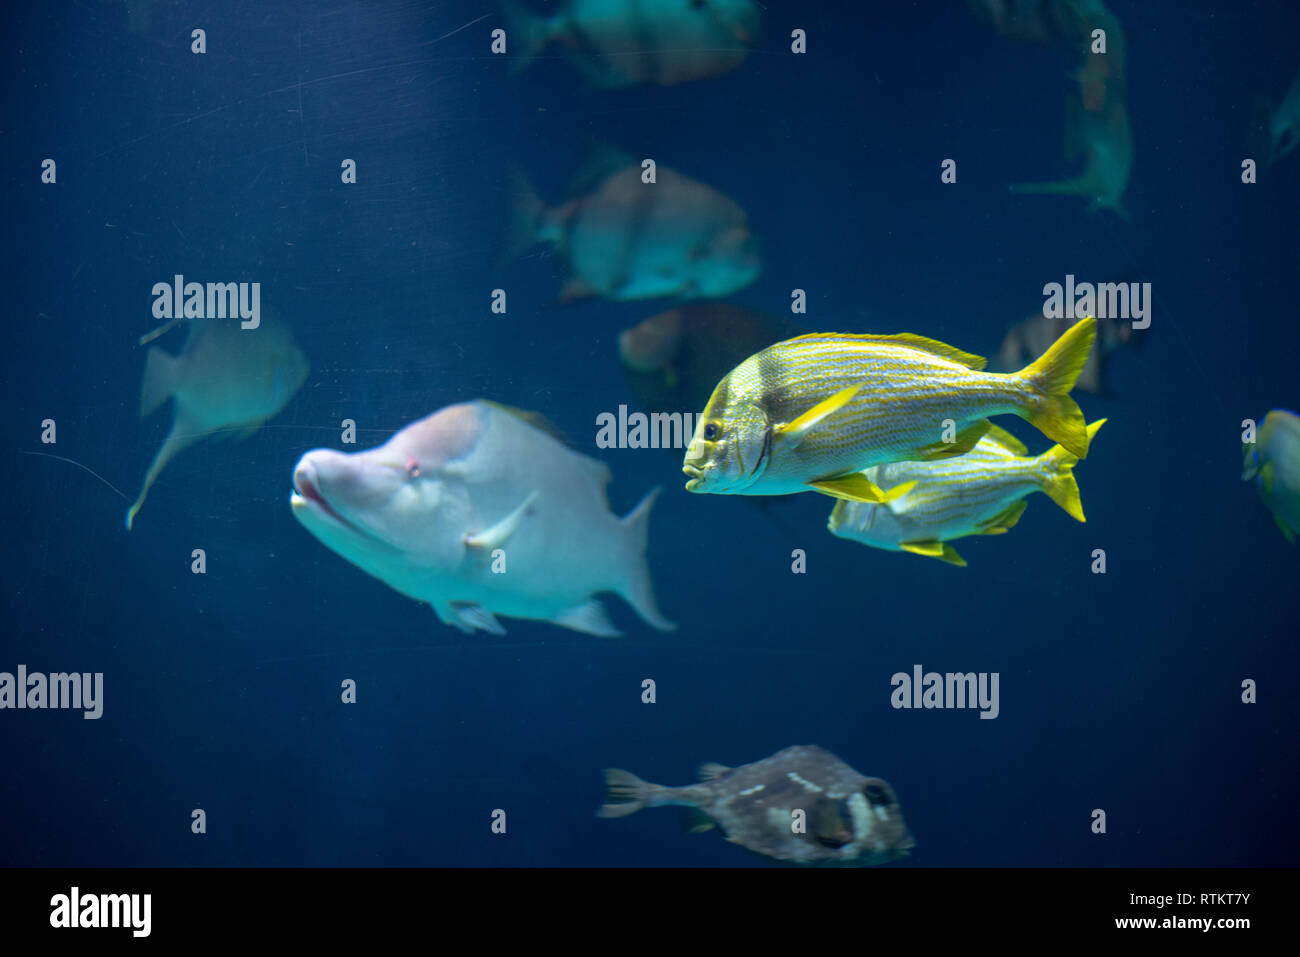 Porkfish (Anisotremus virginicus) in school with other fish Stock Photo